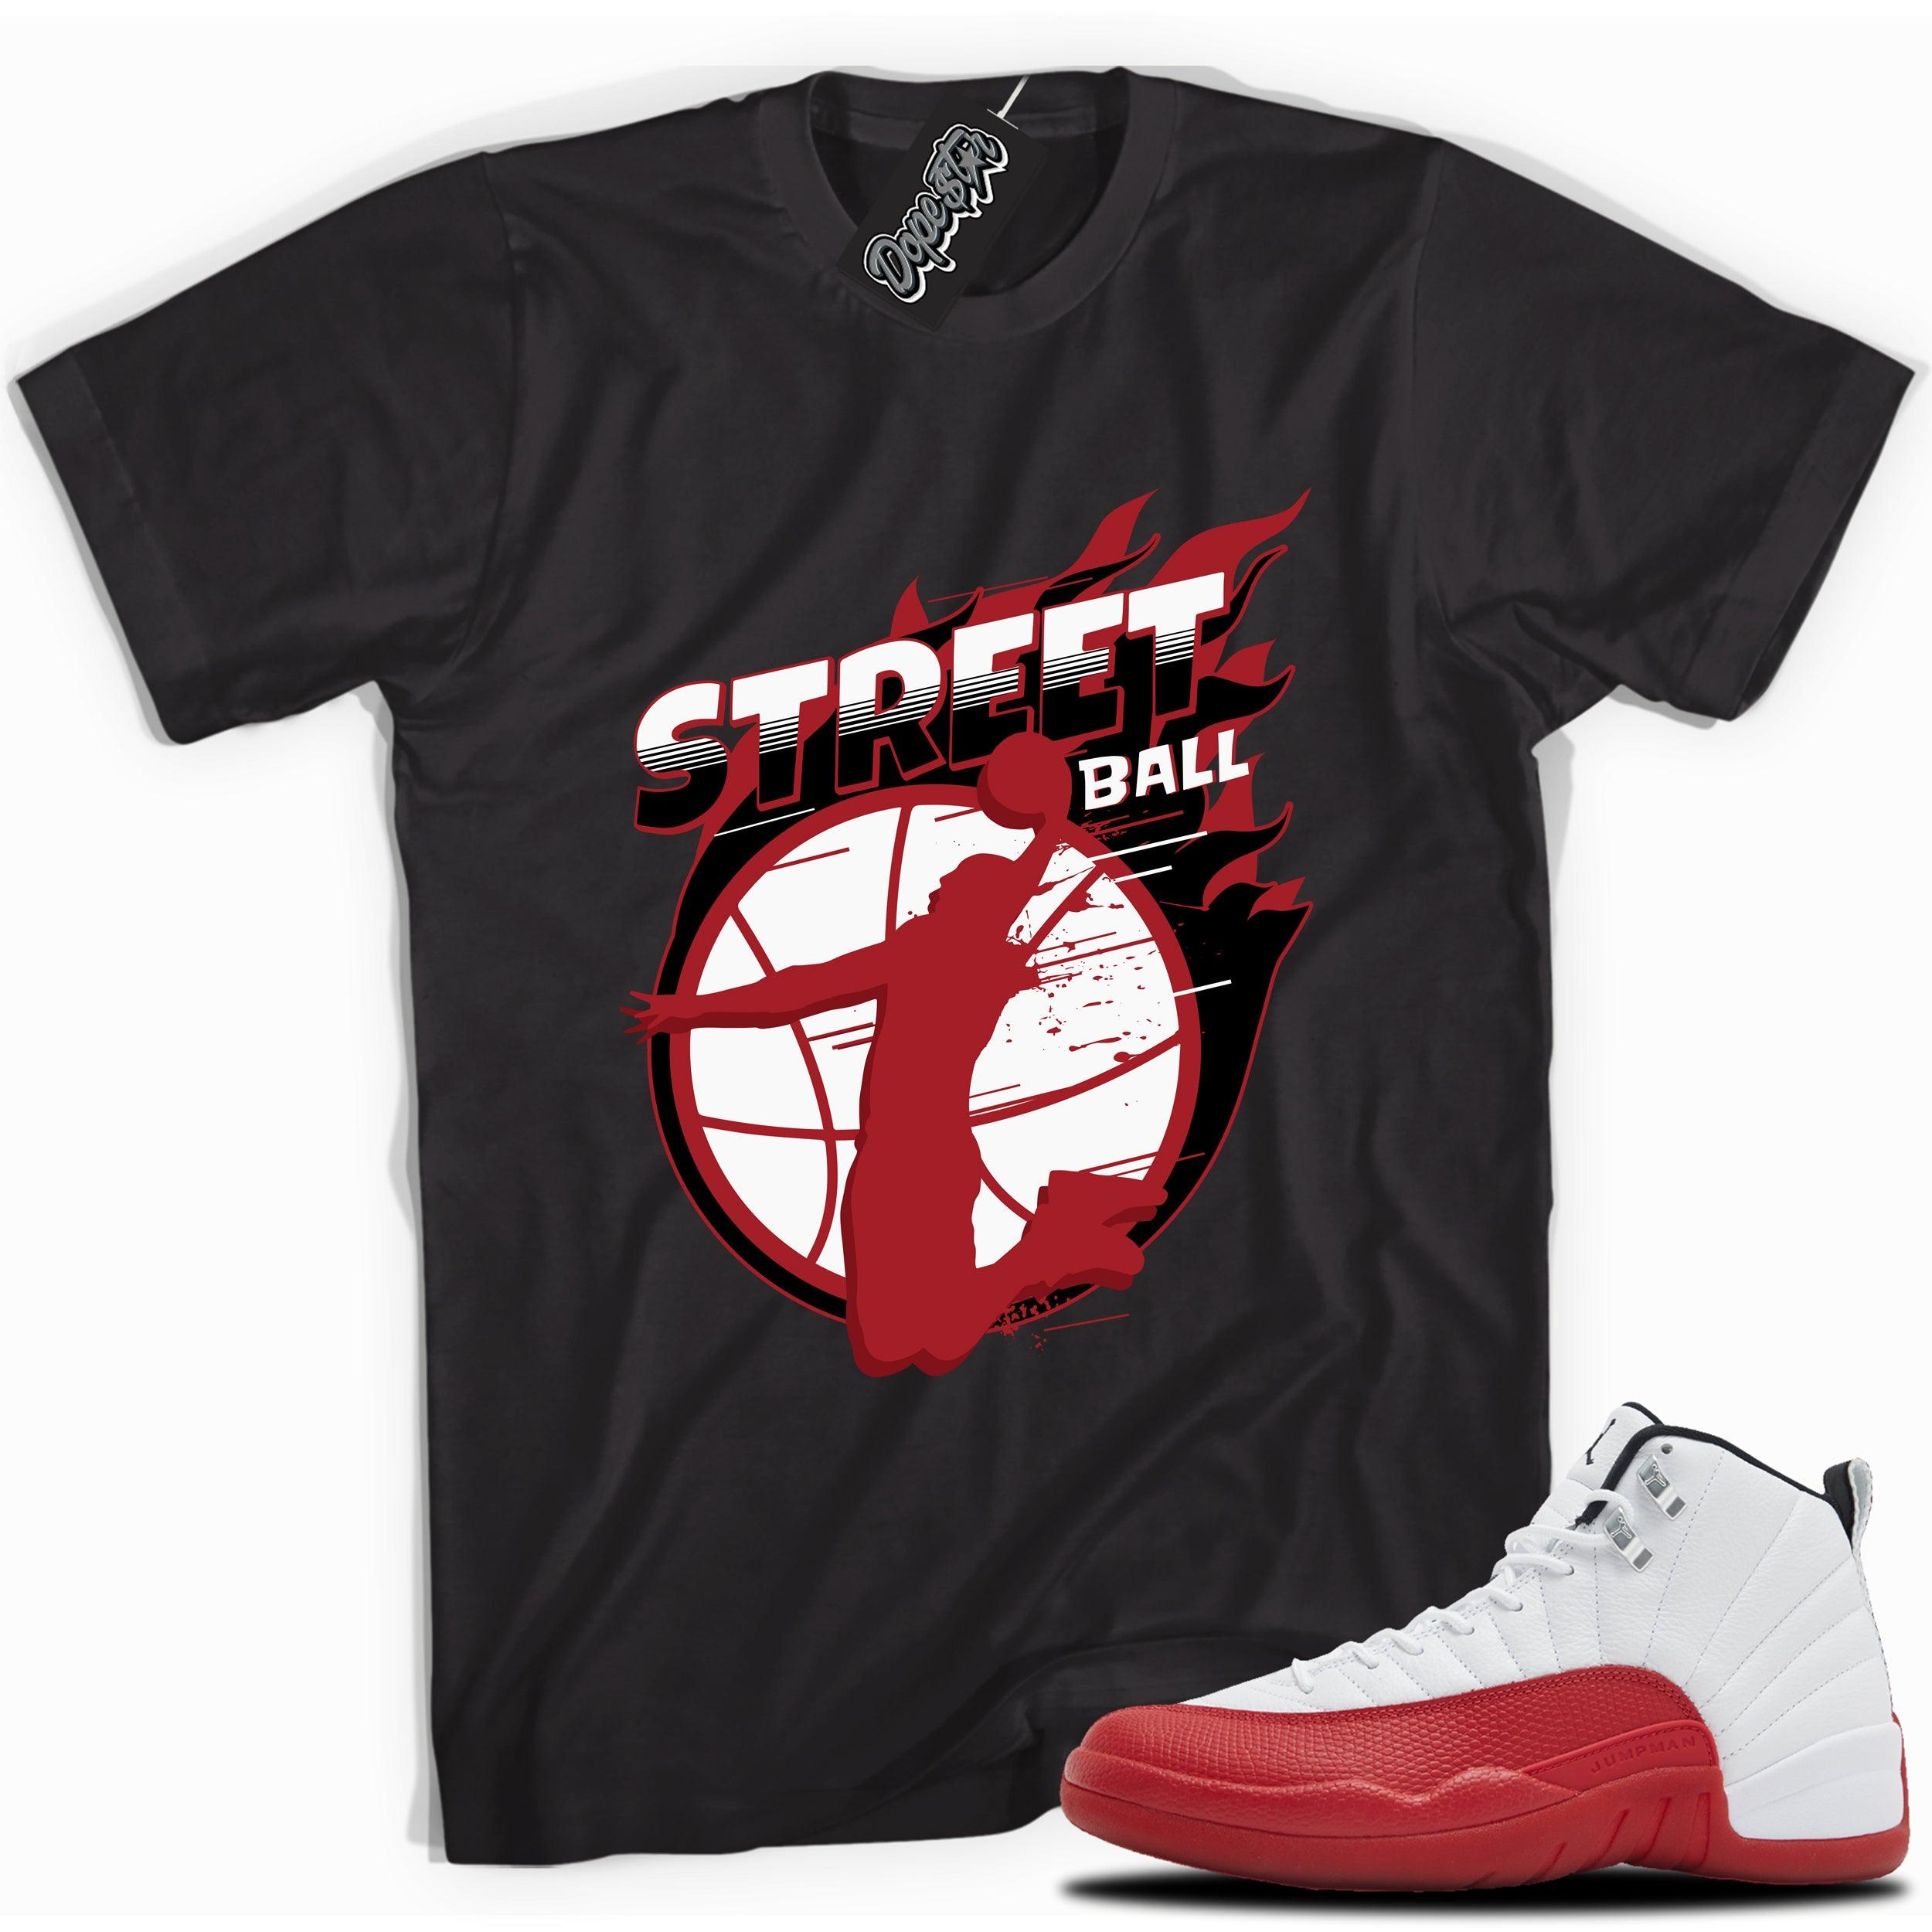 Cool Black graphic tee with “Street Ball” print, that perfectly matches Air Jordan 12 Retro Cherry Red 2023 red and white sneakers 